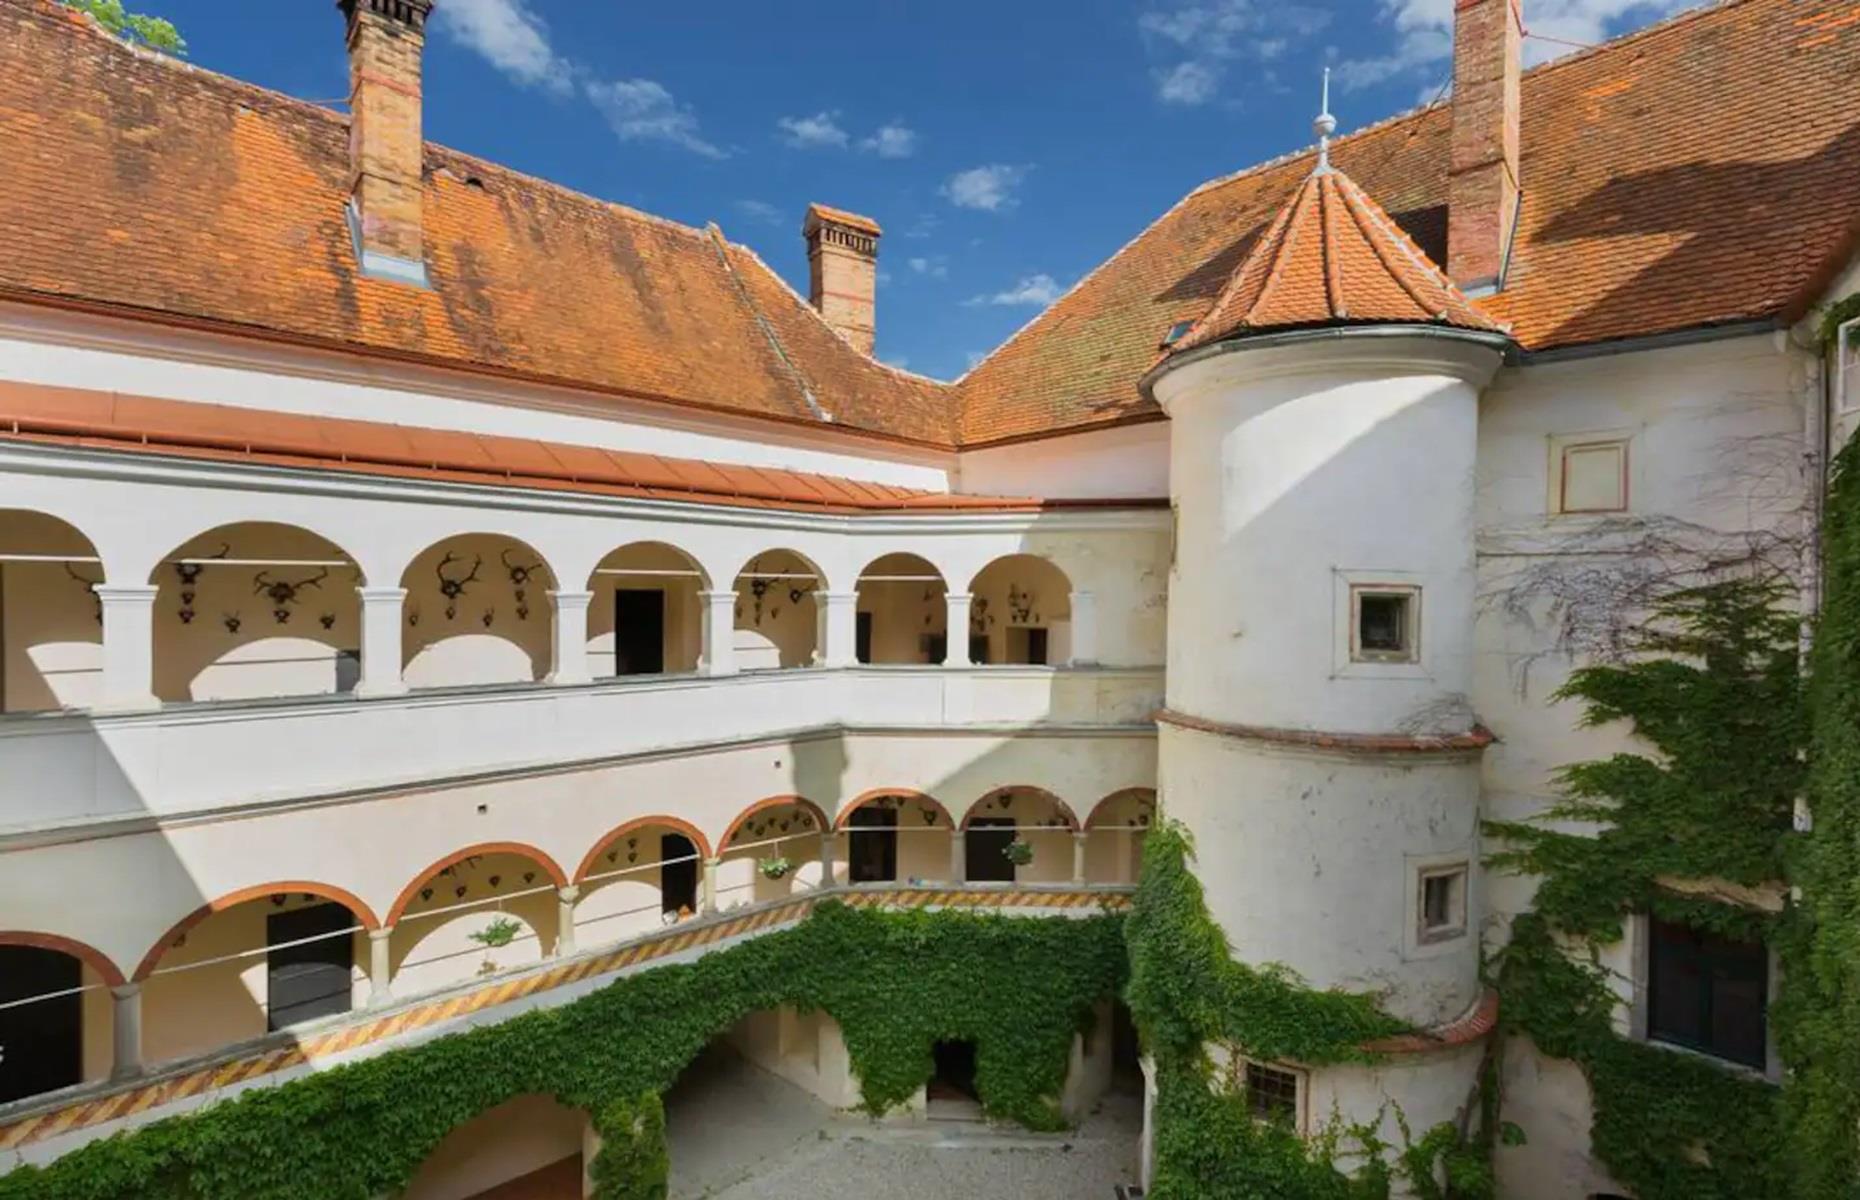 <p>Originally, the castle featured four towers and was surrounded by a moat. Today, most of its architecture dates back to the 16th century.</p>  <p>The castle has received a lot of renovations and additions over the centuries and Wolfgang von Oed is thought to have added the frescos above the arcades that can still be seen in the courtyard today. </p>